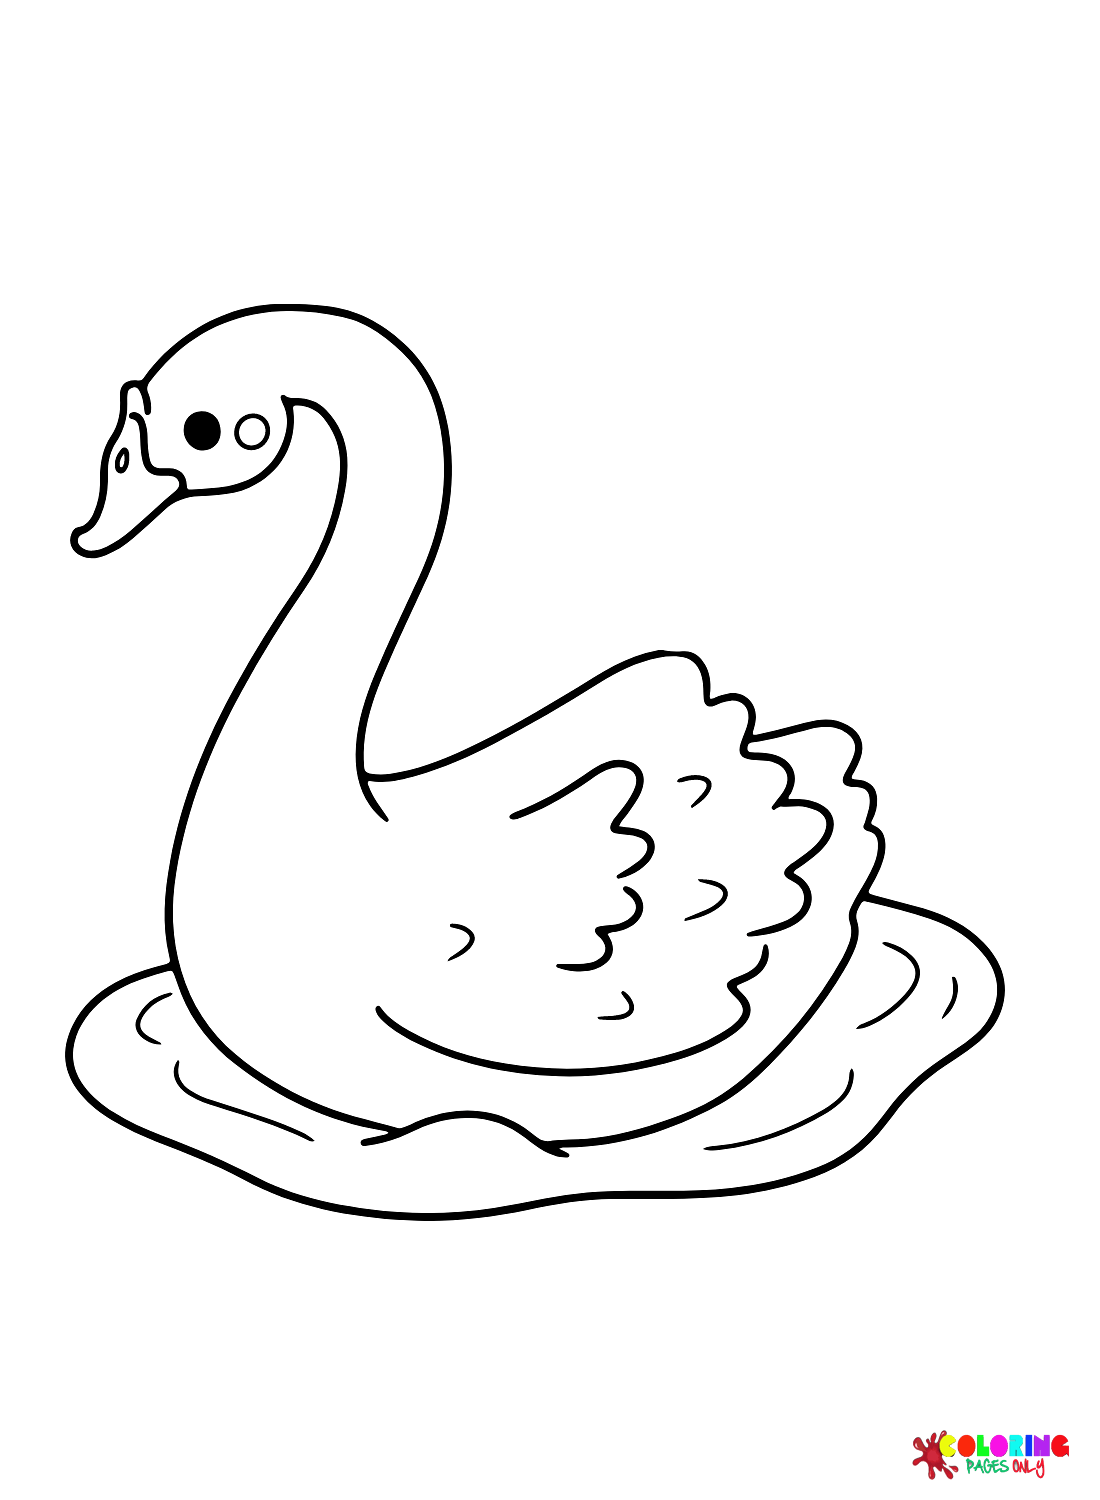 Lovely Swan Coloring Page - Free Printable Coloring Pages